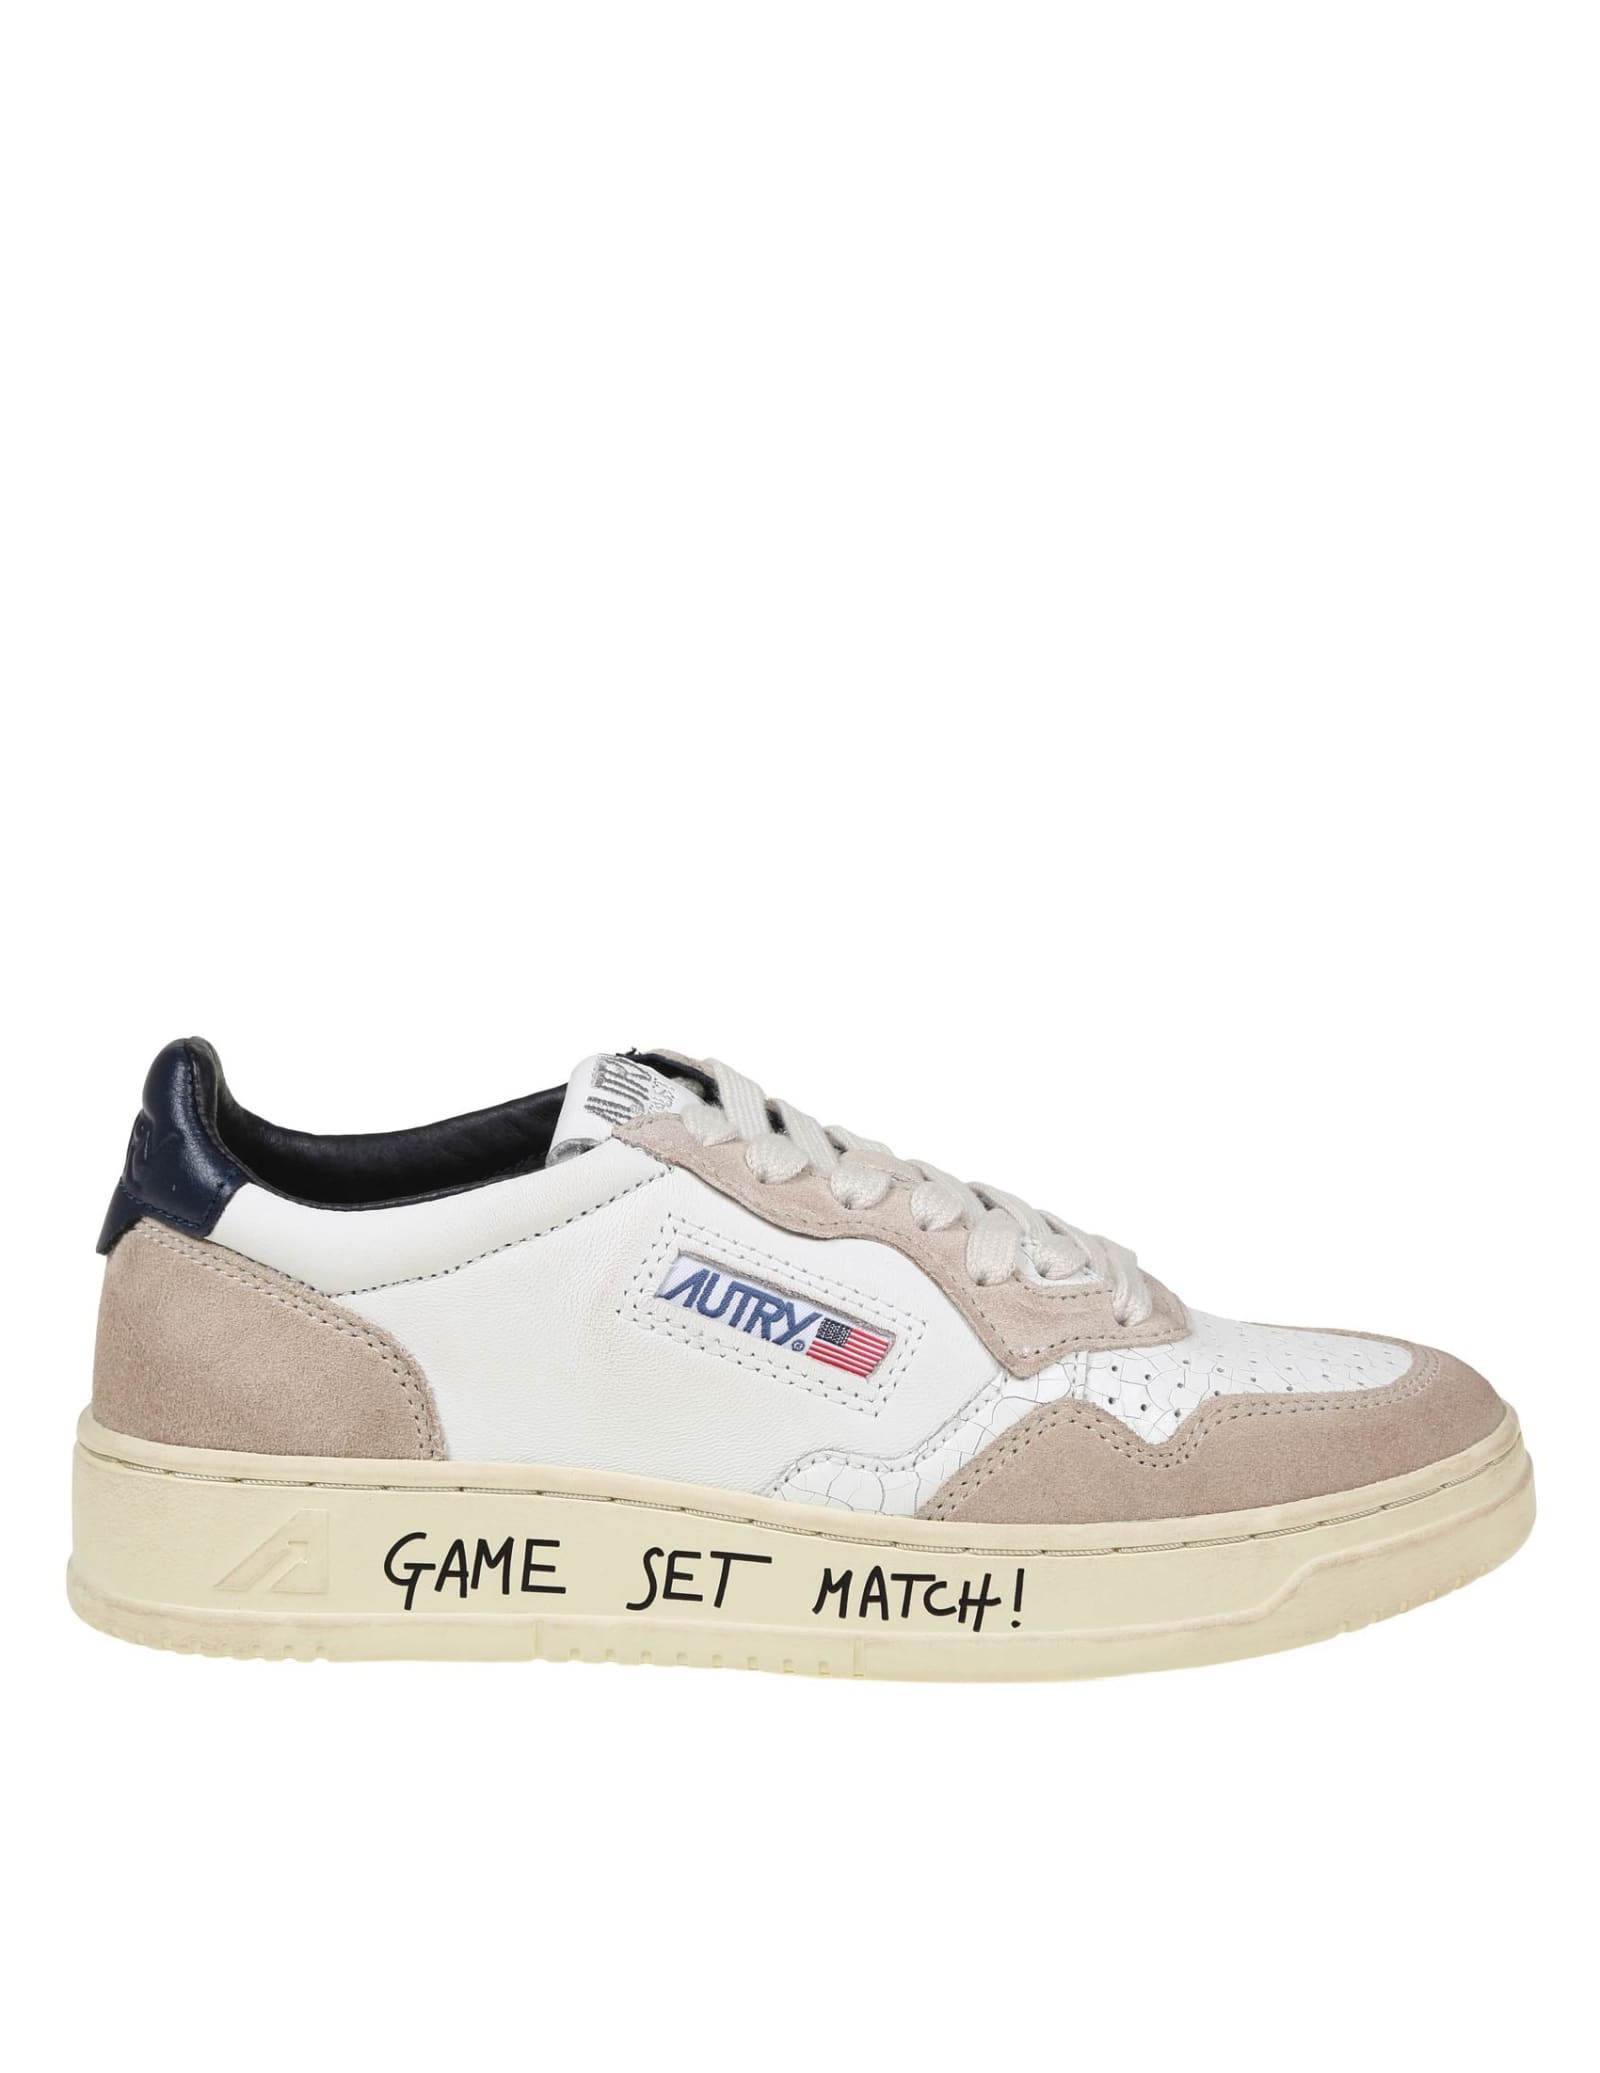 AUTRY SNEAKERS IN WHITE AND BLUE LEATHER